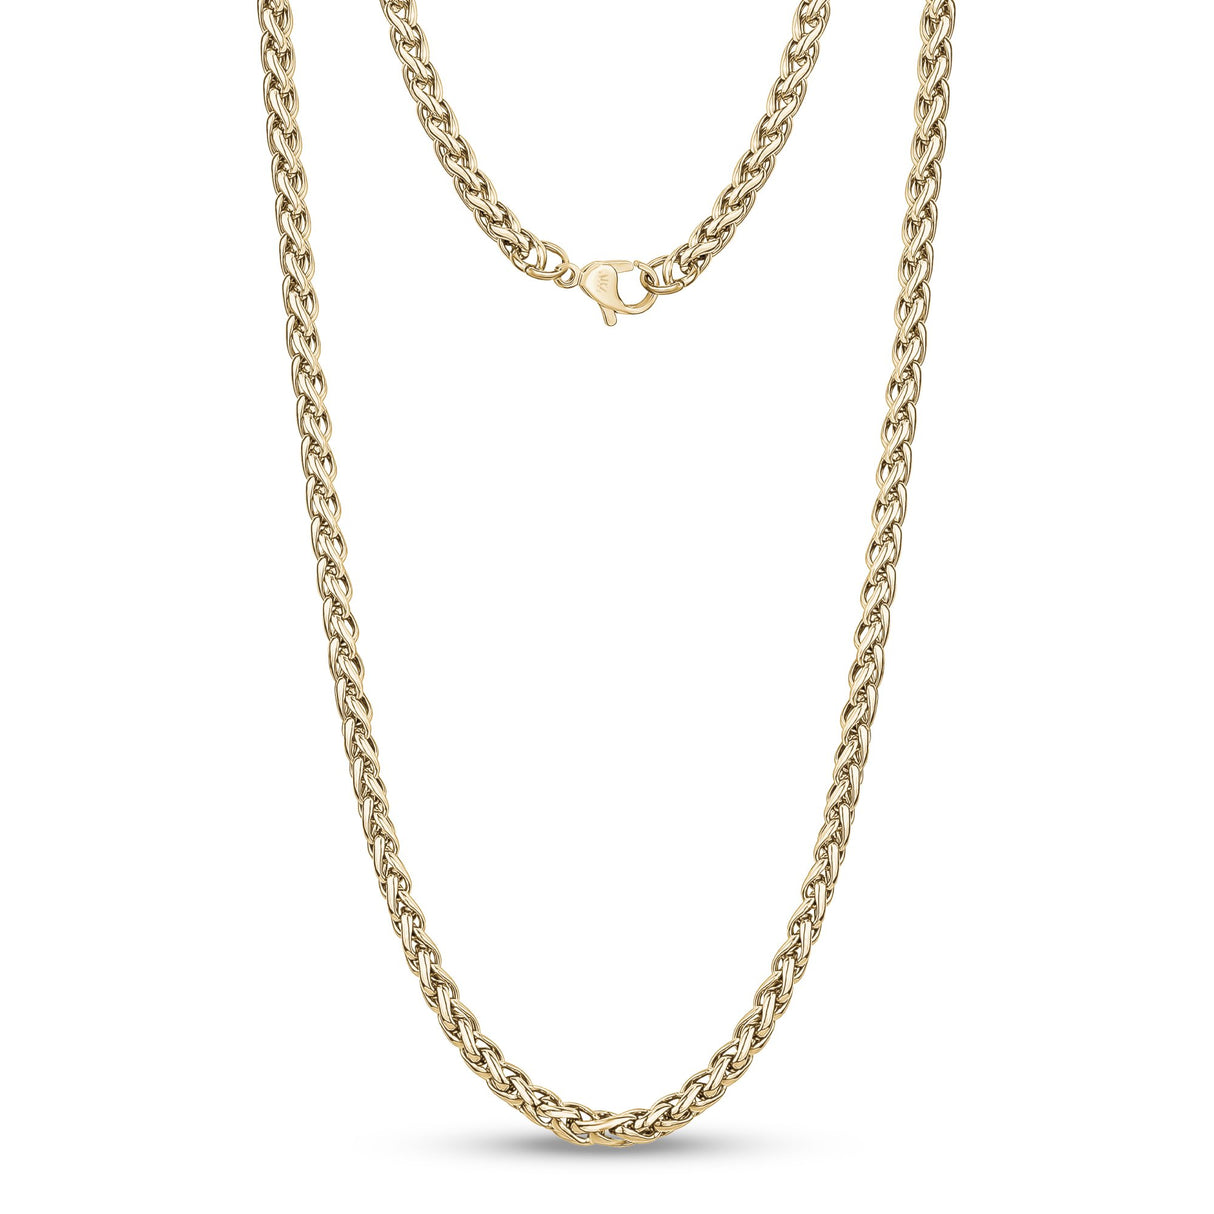 Mannen Ketting - 4mm Goud Roestvrij Staal Ronde Franco Wheat Chain Ketting